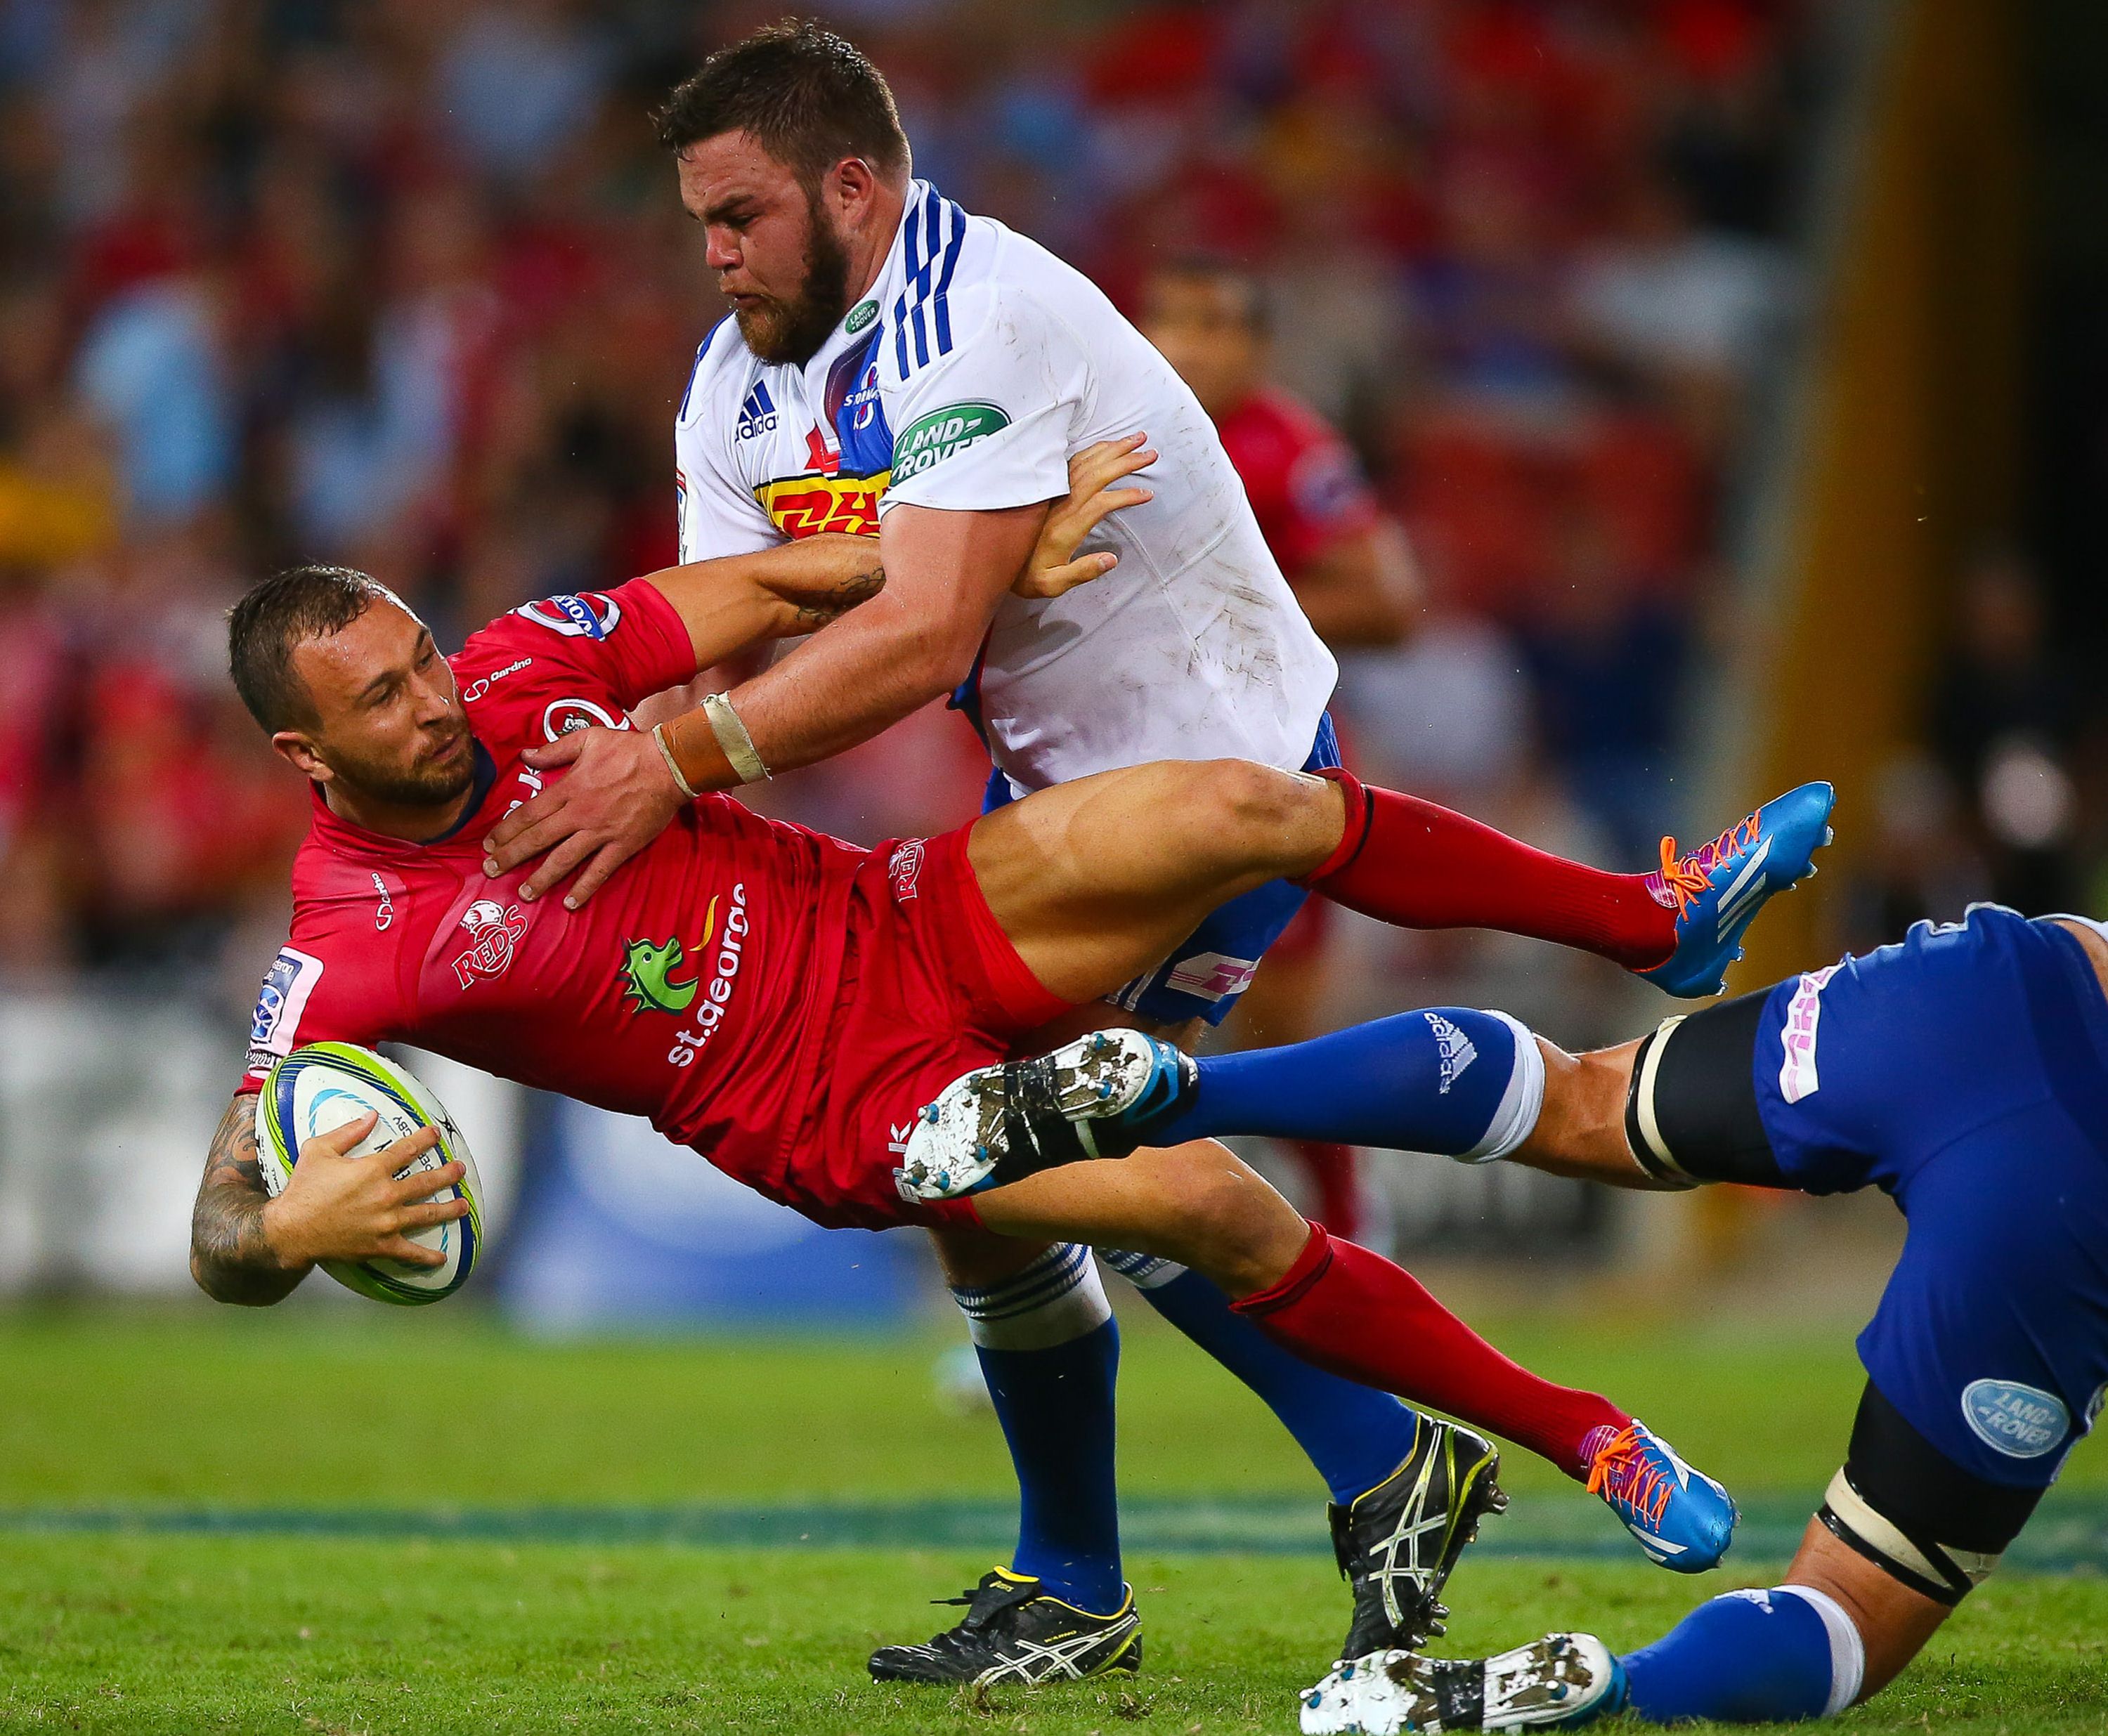 Quade Cooper has signed a pre-commitment to join French side Toulon after the World Cup in England and Wales later this year, according to reports. Photo: AFP
